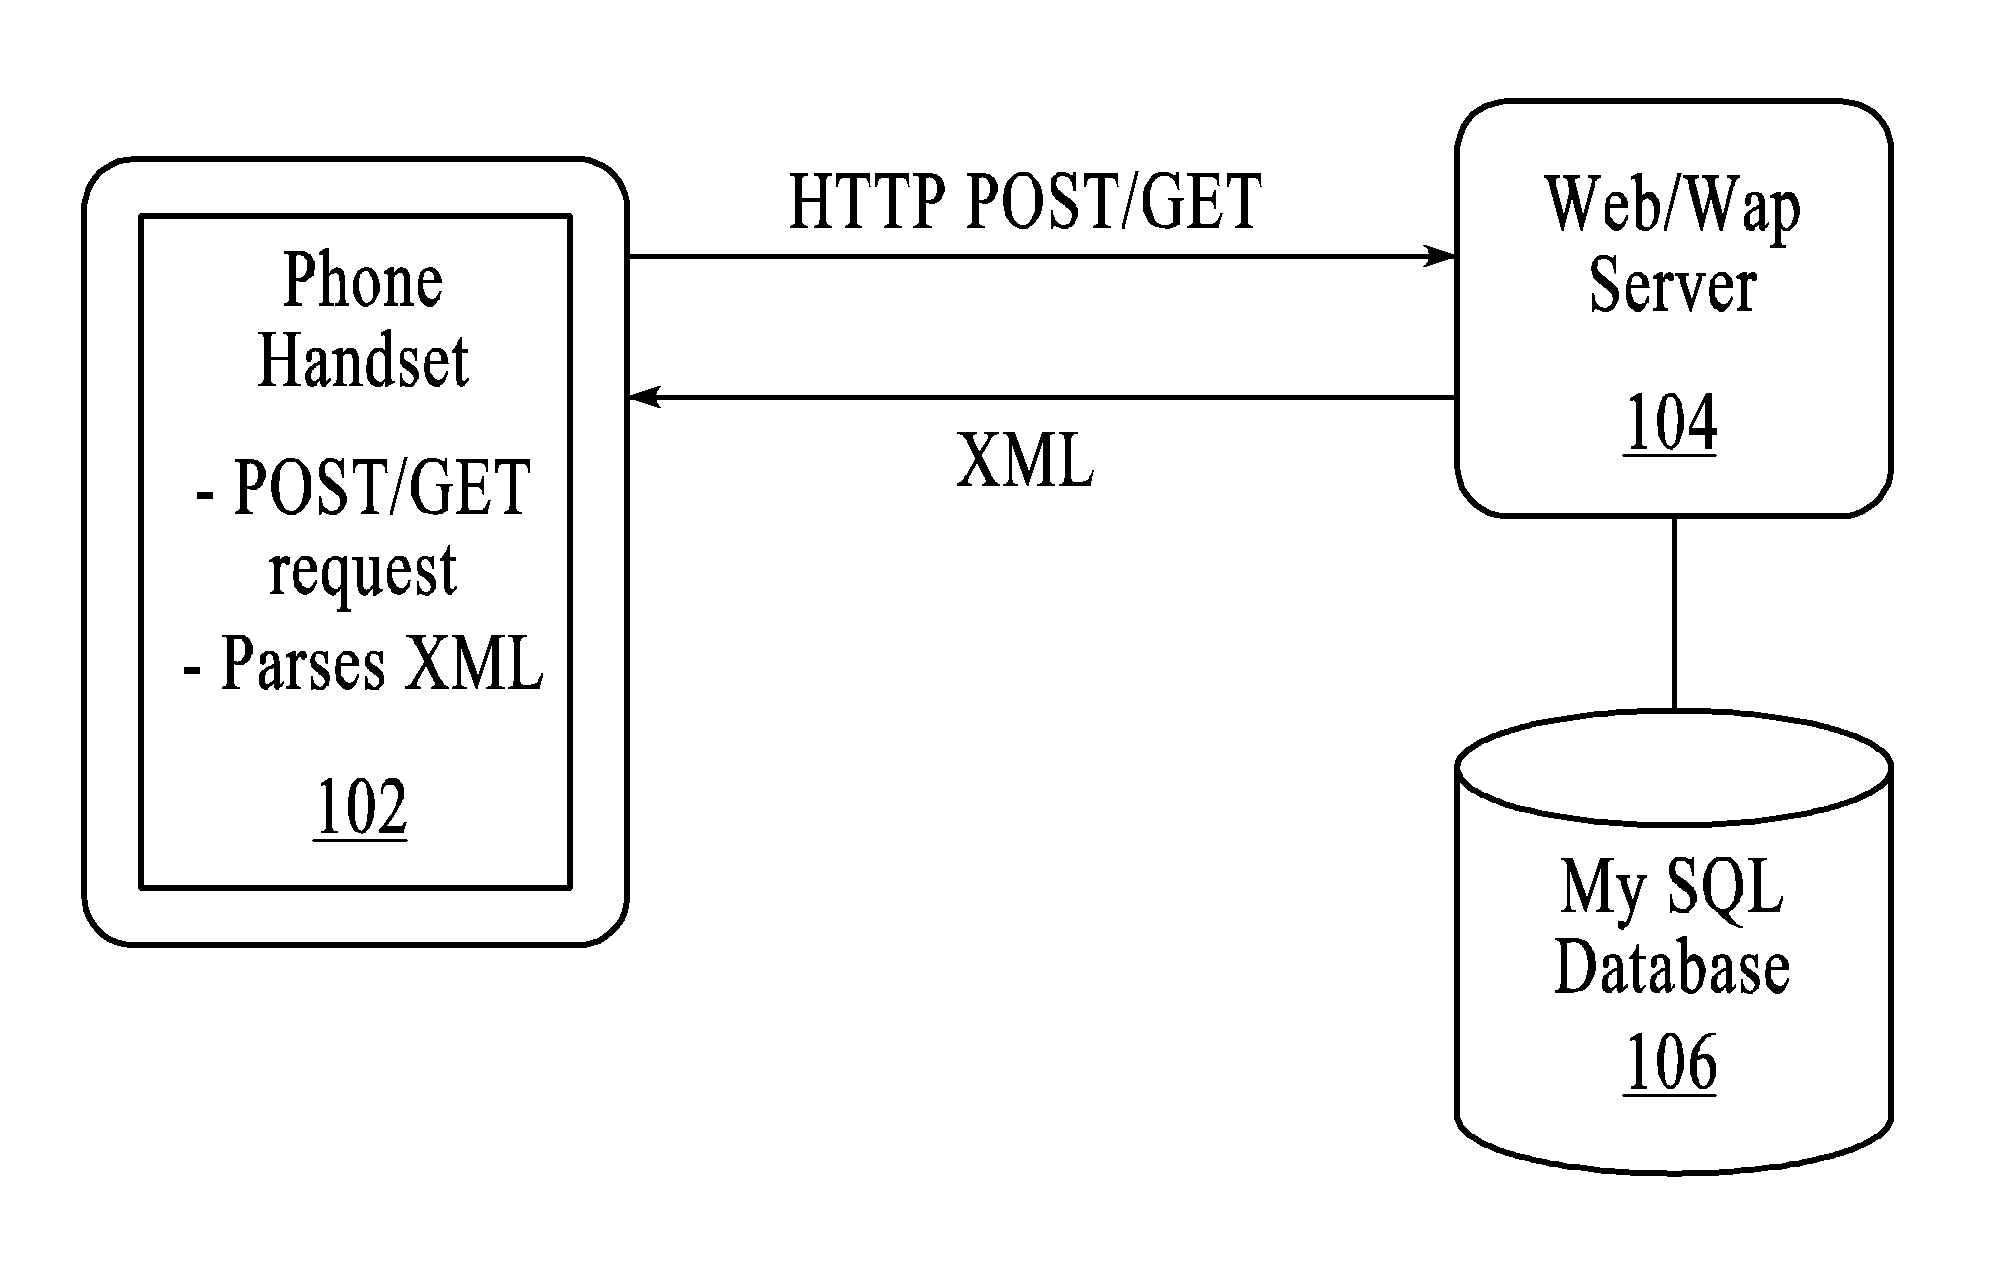 Systems and methods for portable audio synthesis